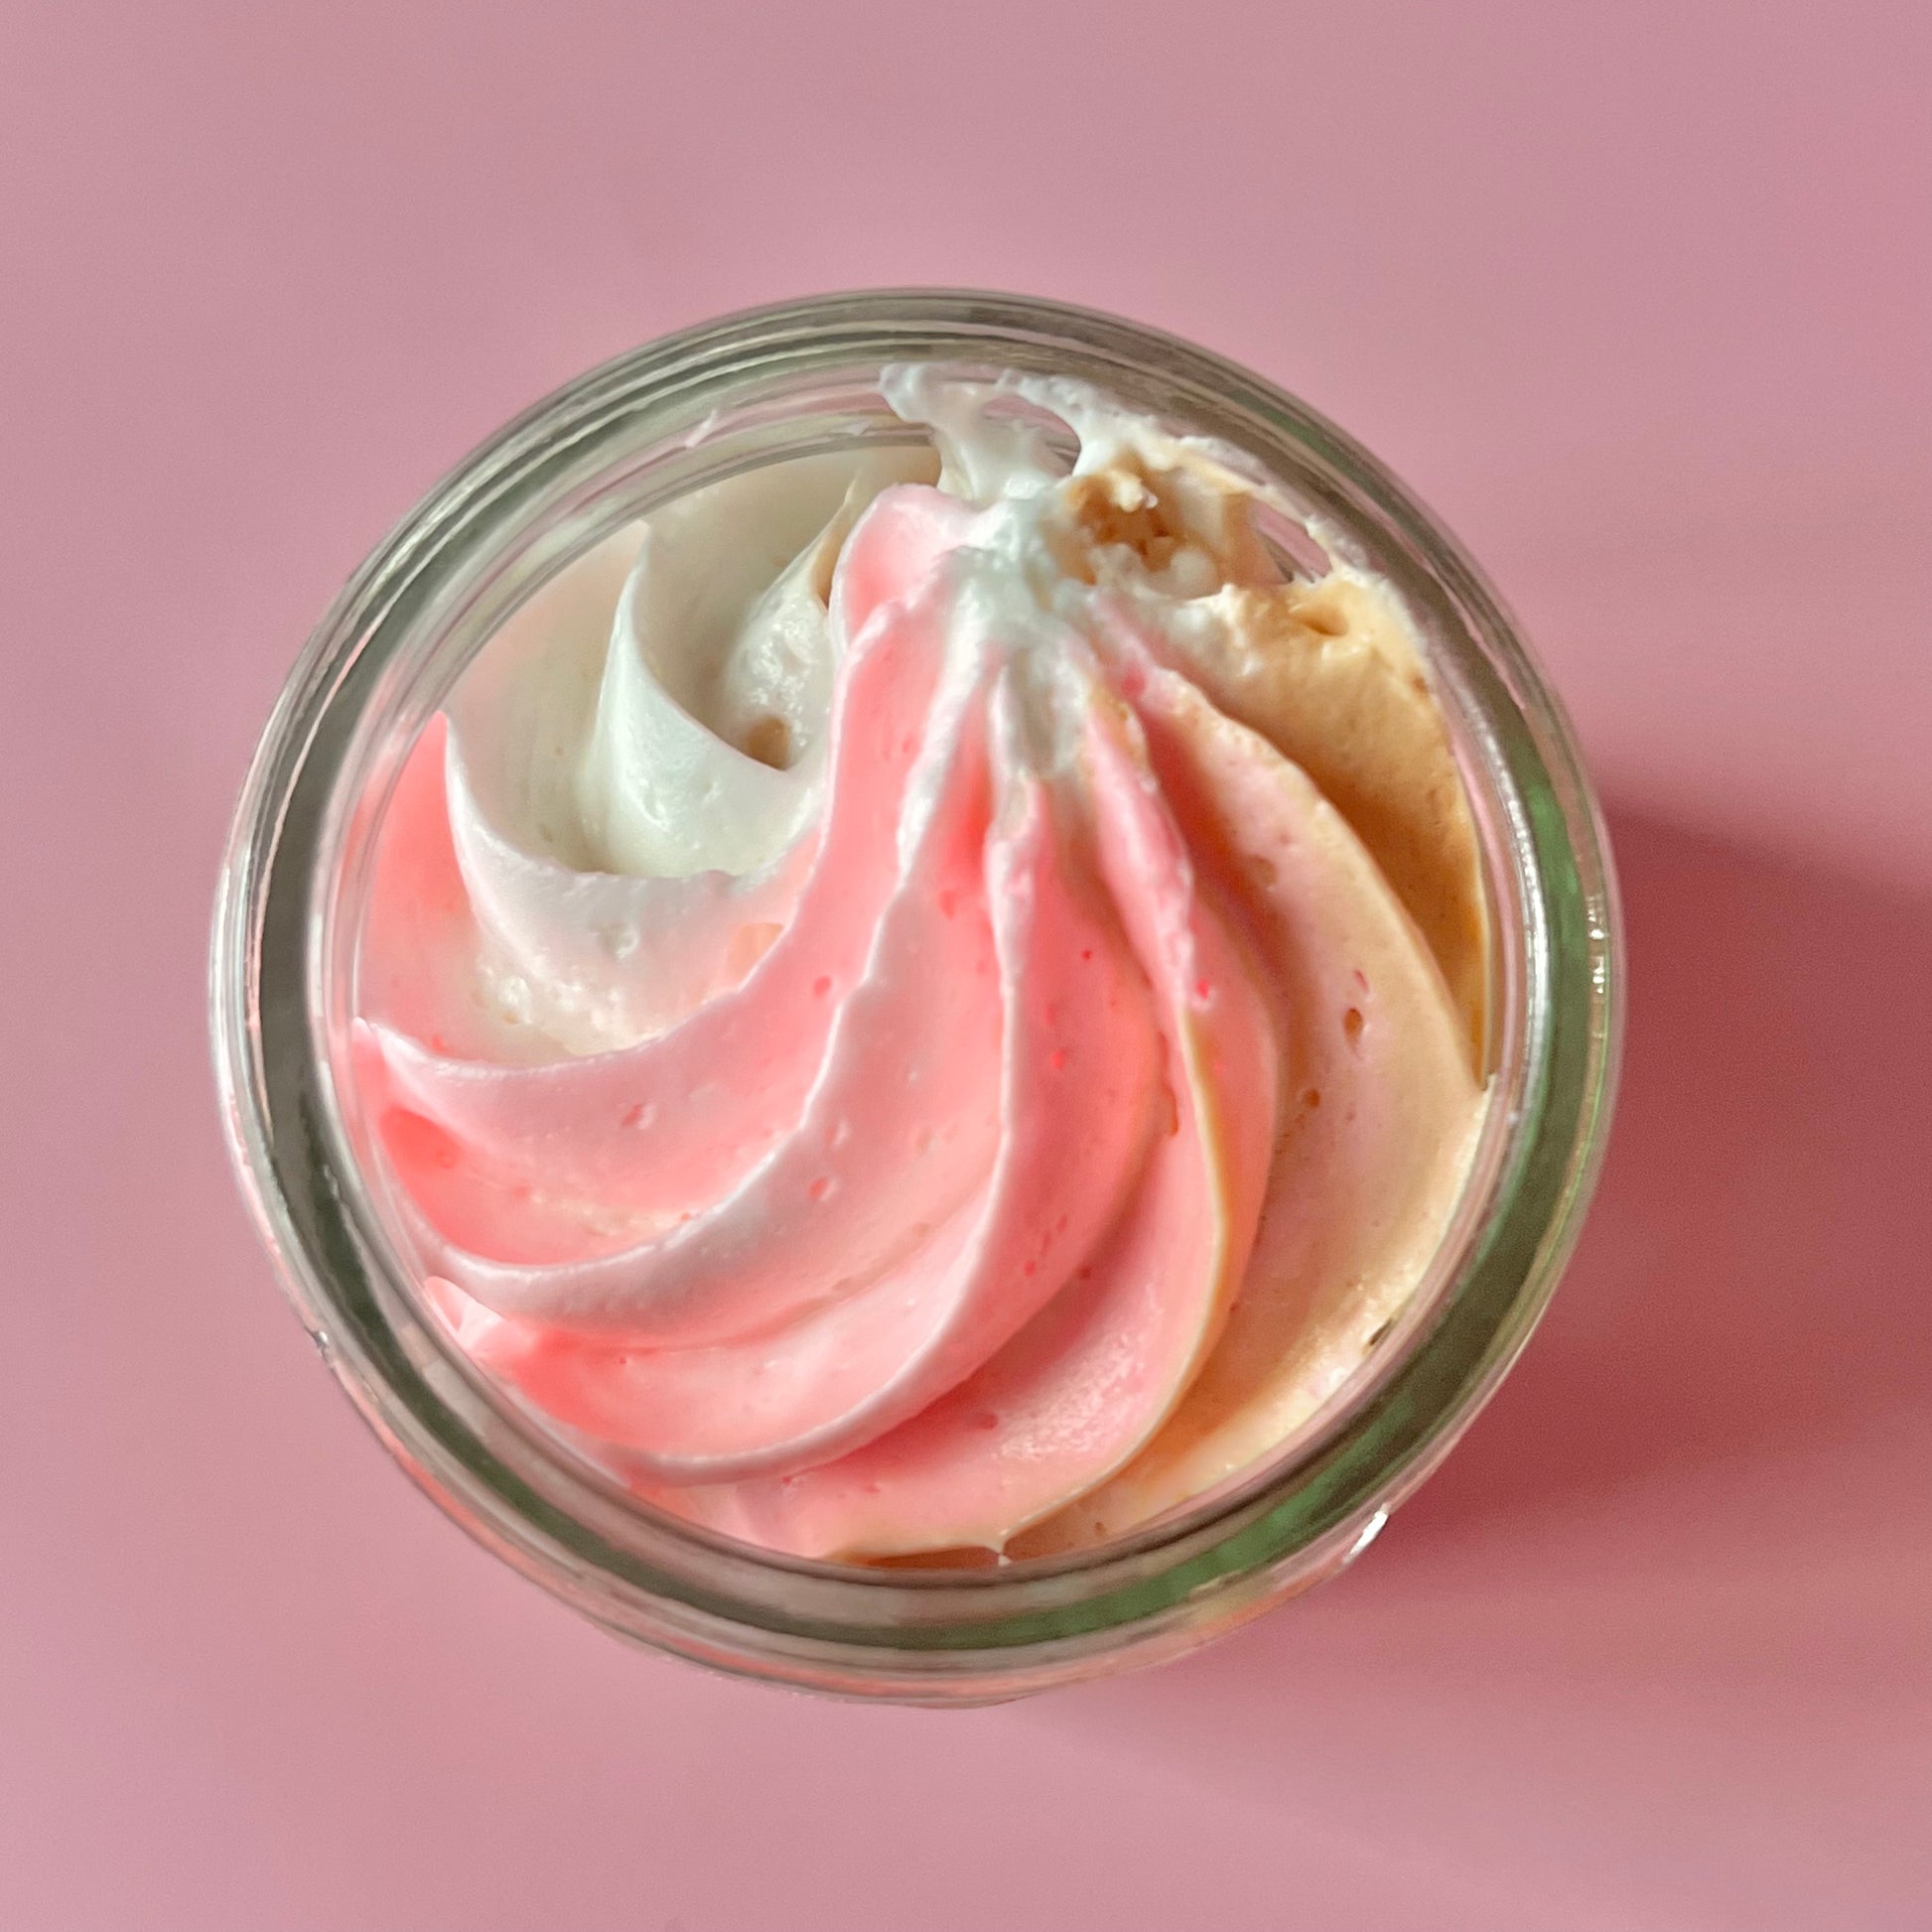 Caramel marshmallow is a sweet dessert body butter cream with the most and best moisturising benefits to dry skin. the best uk body cream that leaves the skin glowing, packed with vitamin e, 99% natural ingredients and alcohol free. 